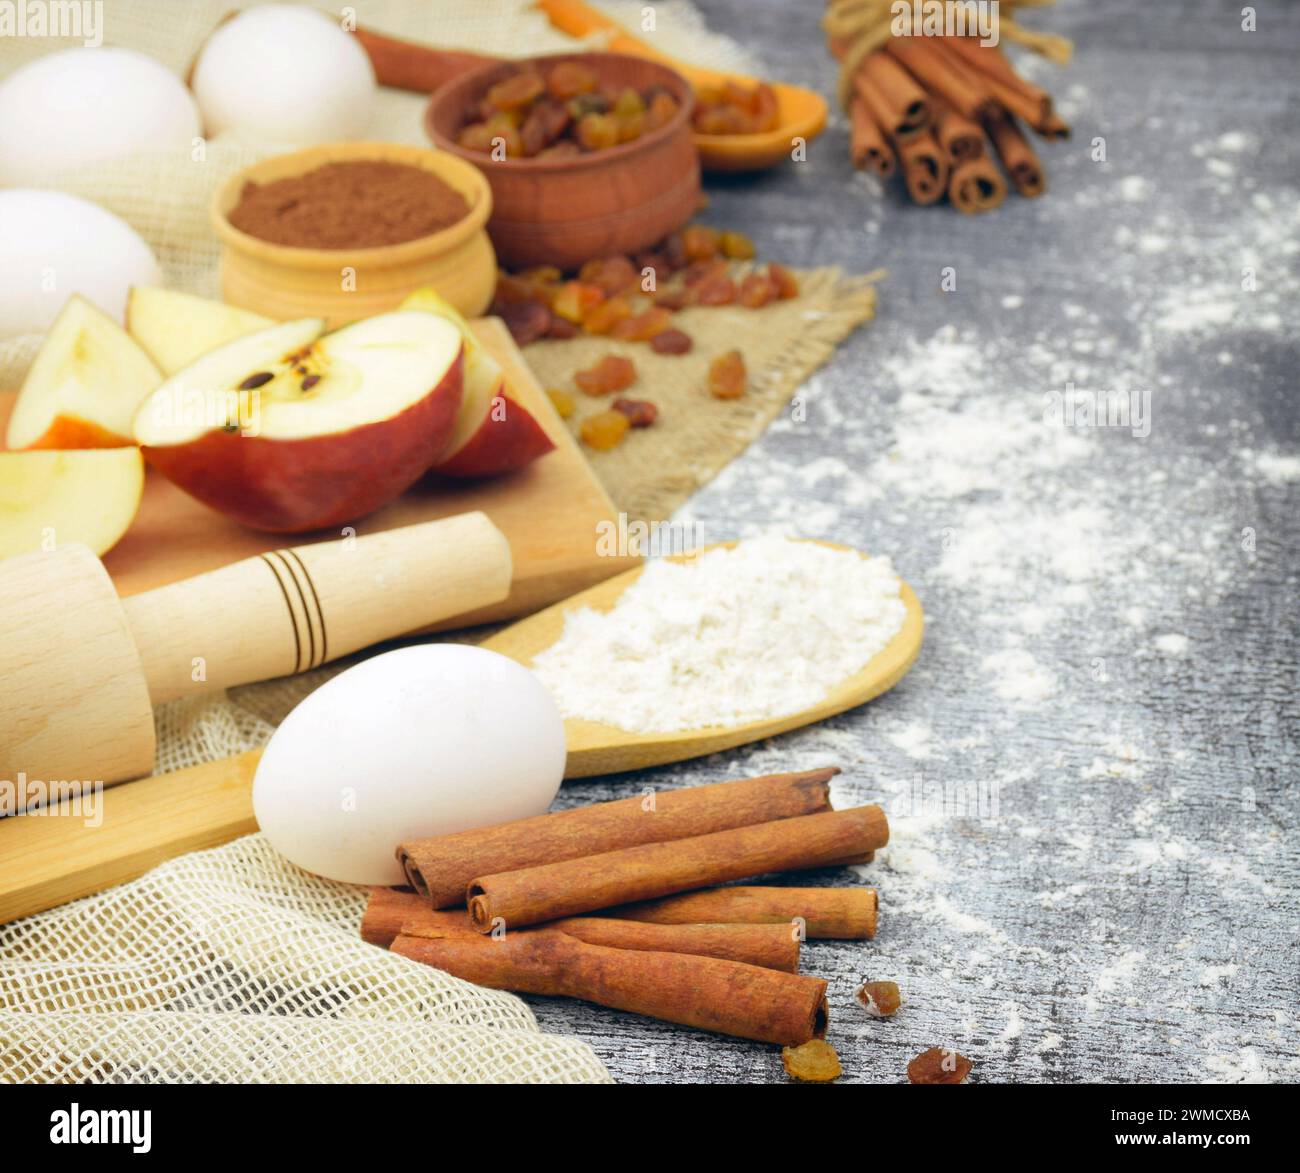 Ingredients for homemade pastries. Eggs, cinnamon, flour. apples, raisins, vanilla, and cookware. Concept: home cooking. Traditions. Cosiness. Stock Photo